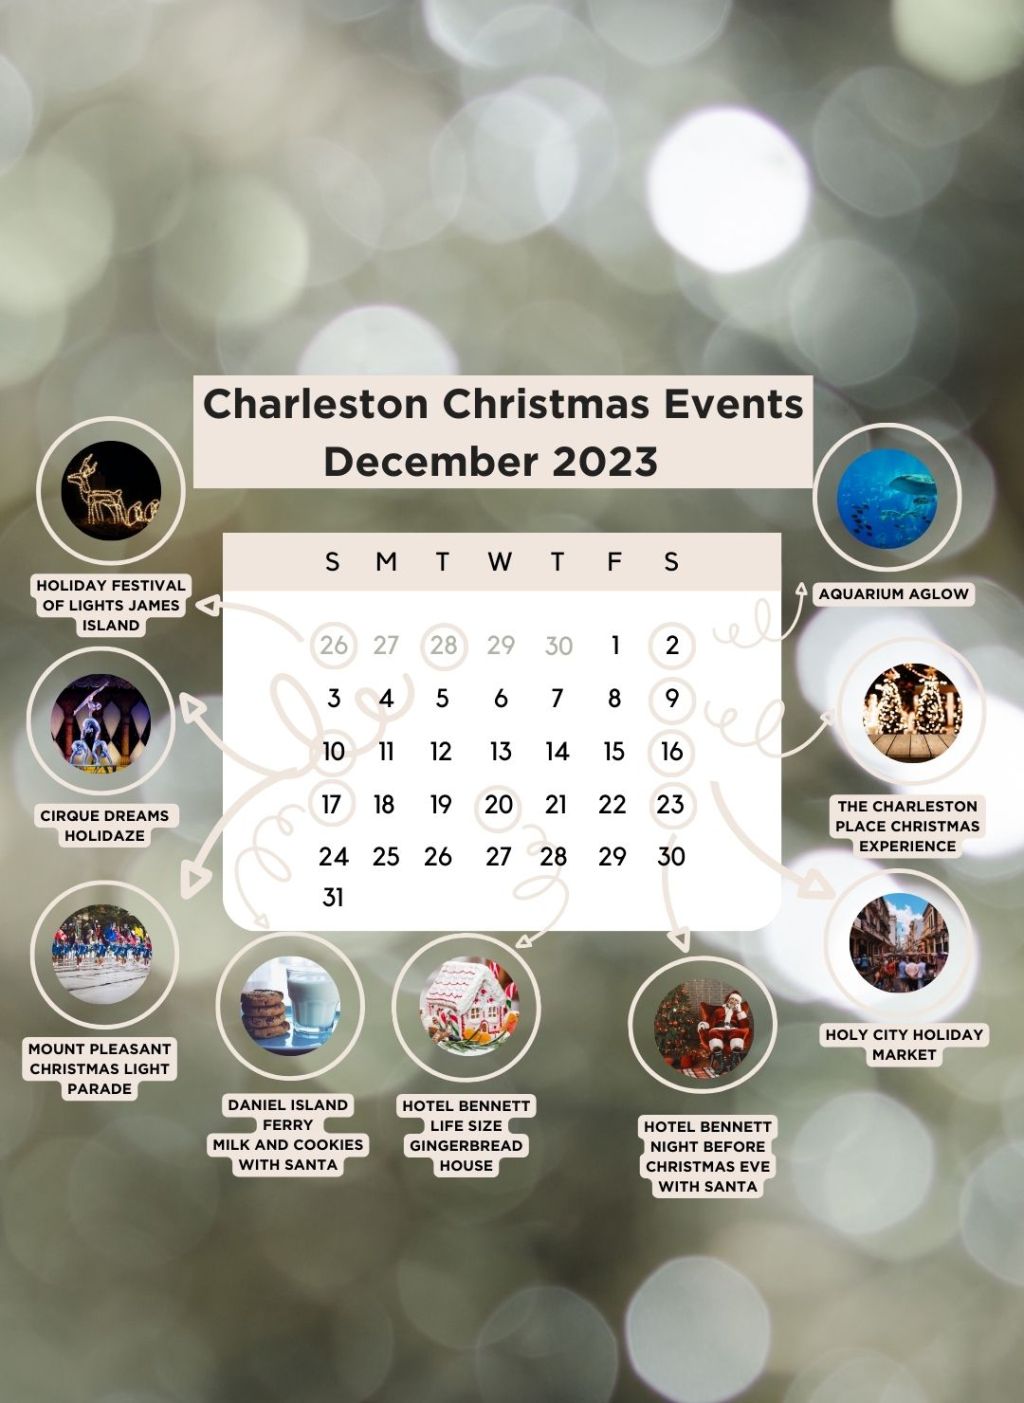 Christmas Events in Charleston, SC